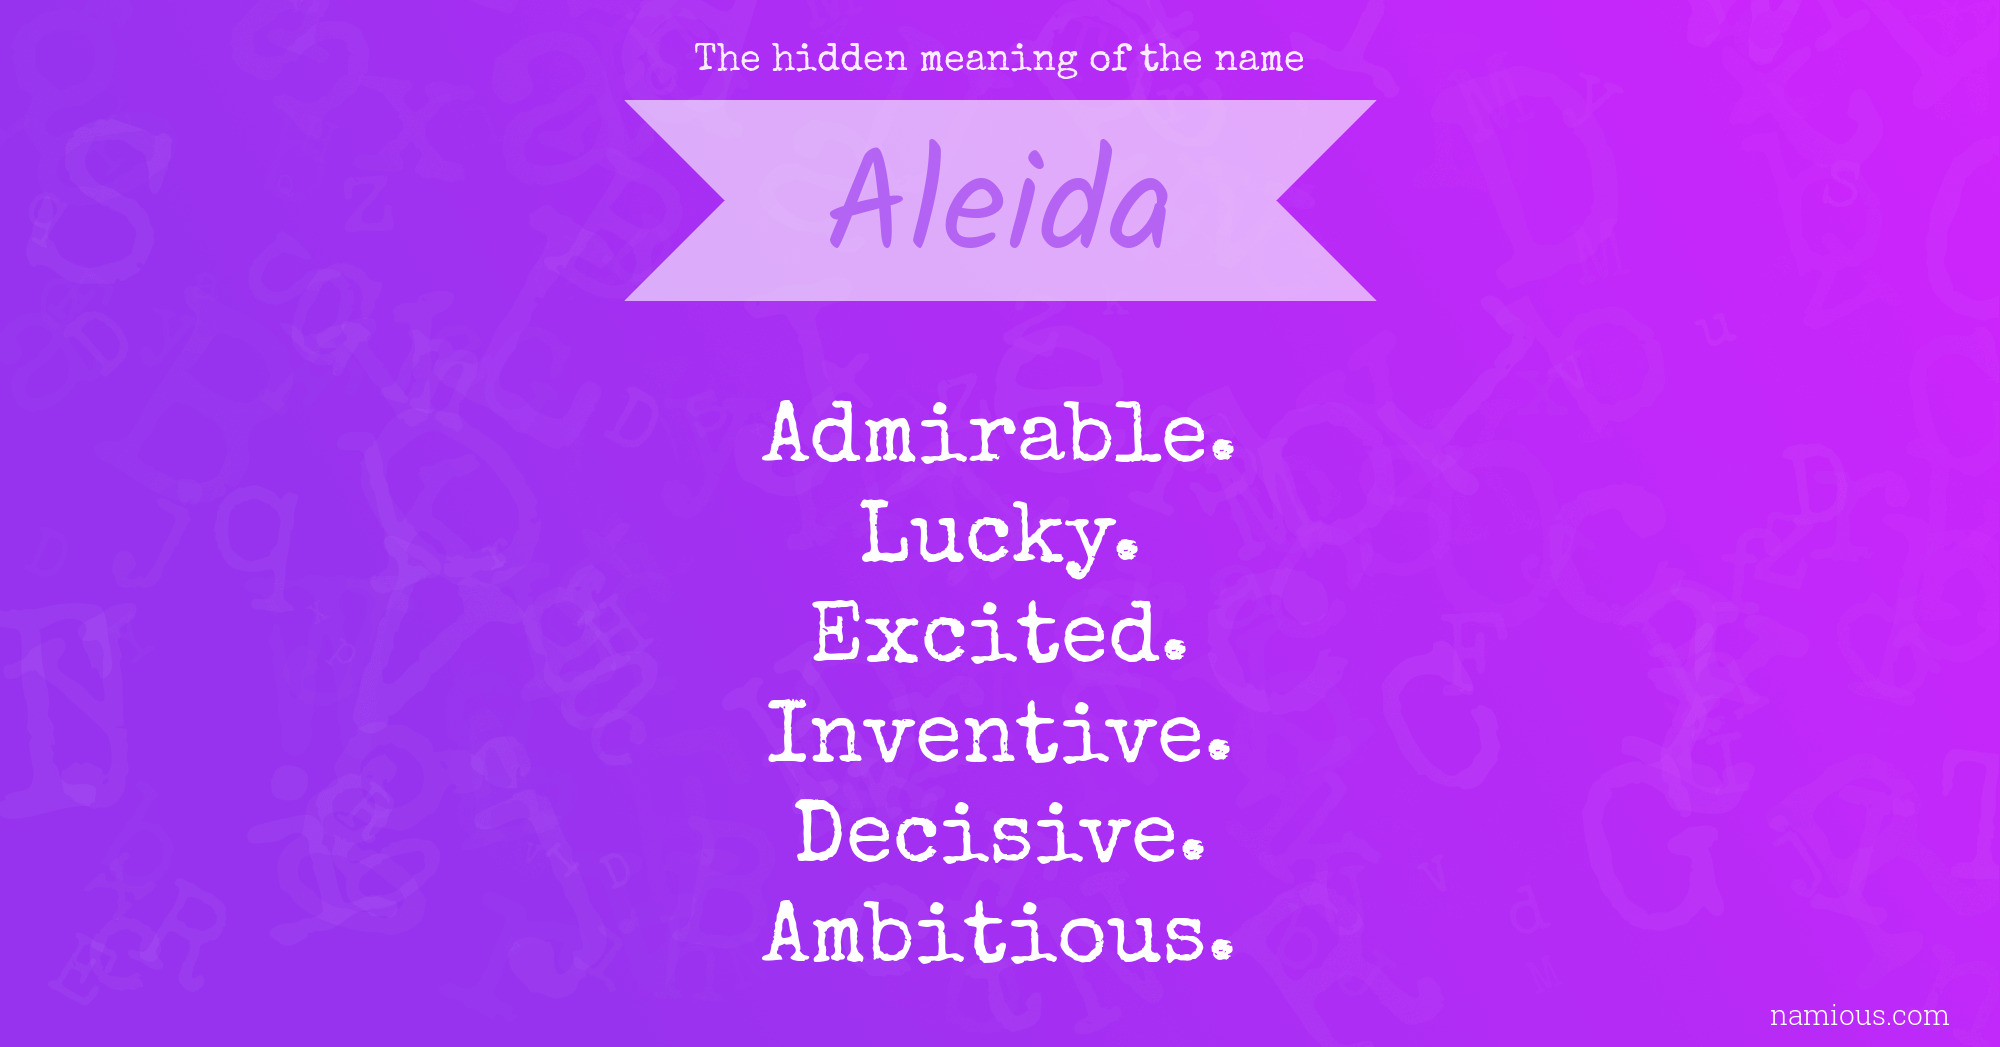 The hidden meaning of the name Aleida